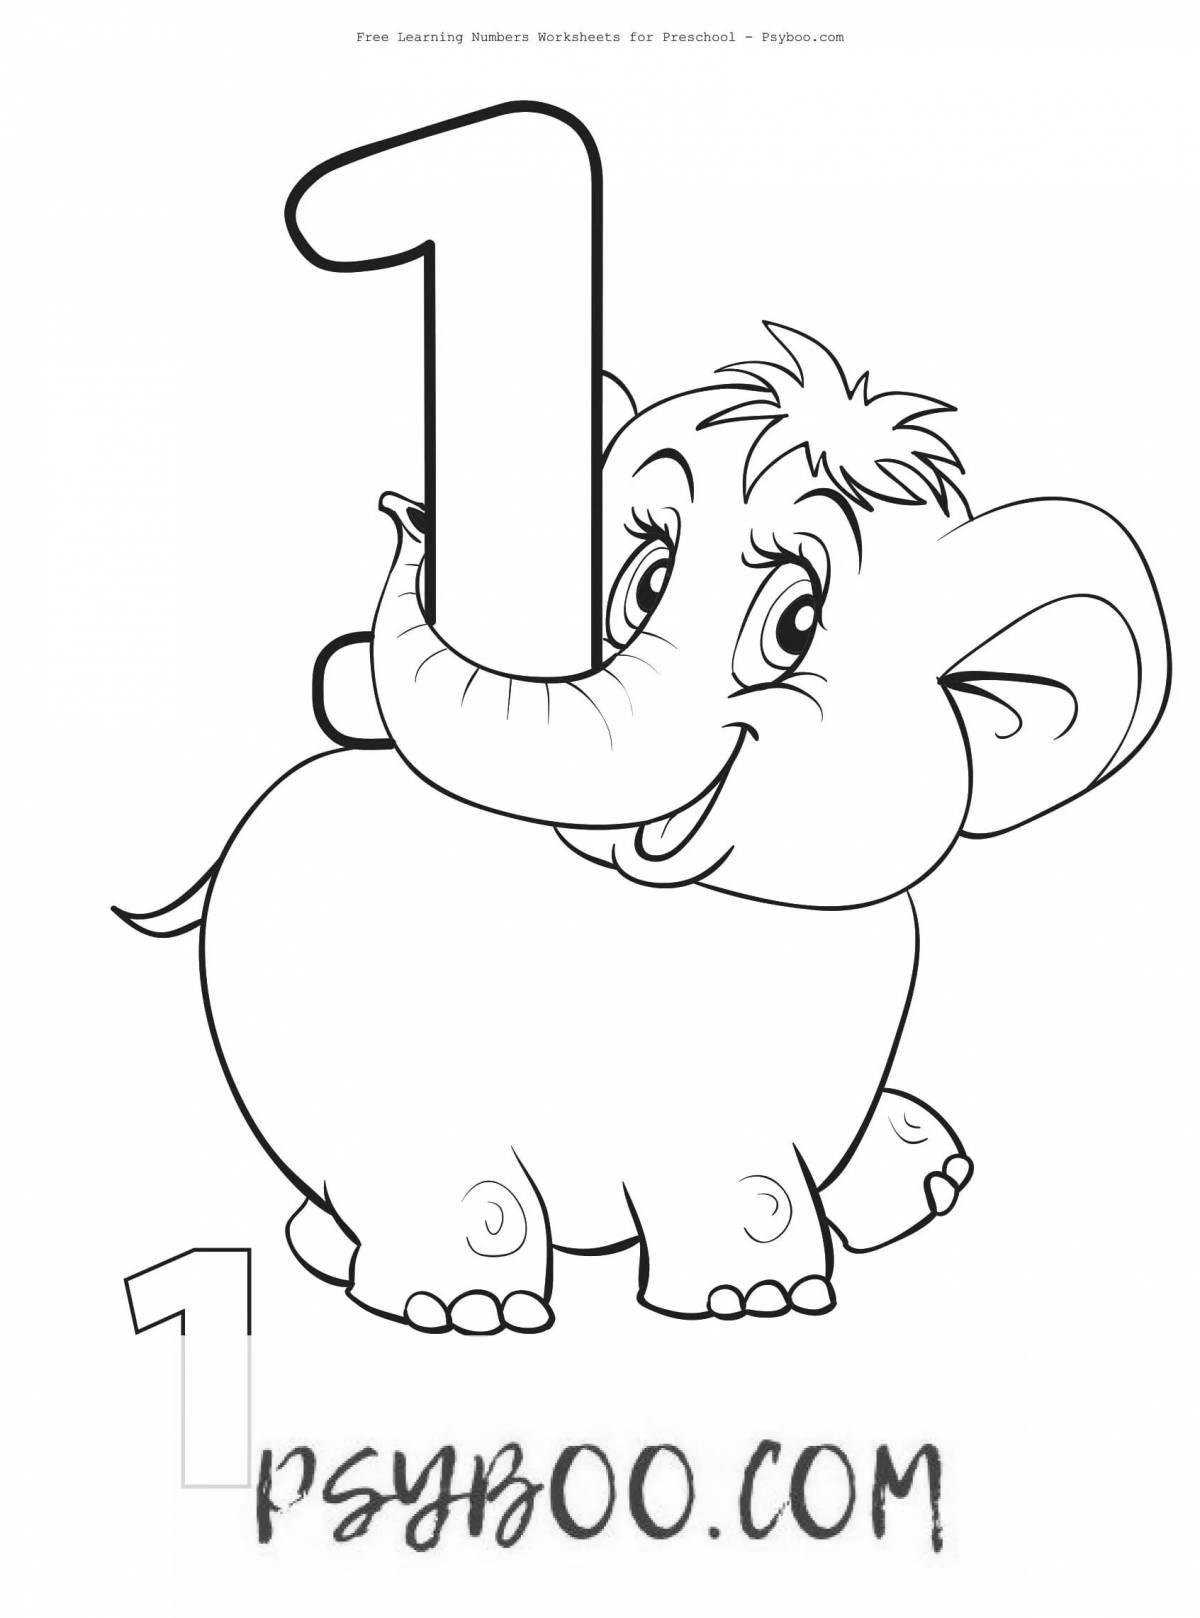 Creative coloring book with combinations of letters and numbers for children